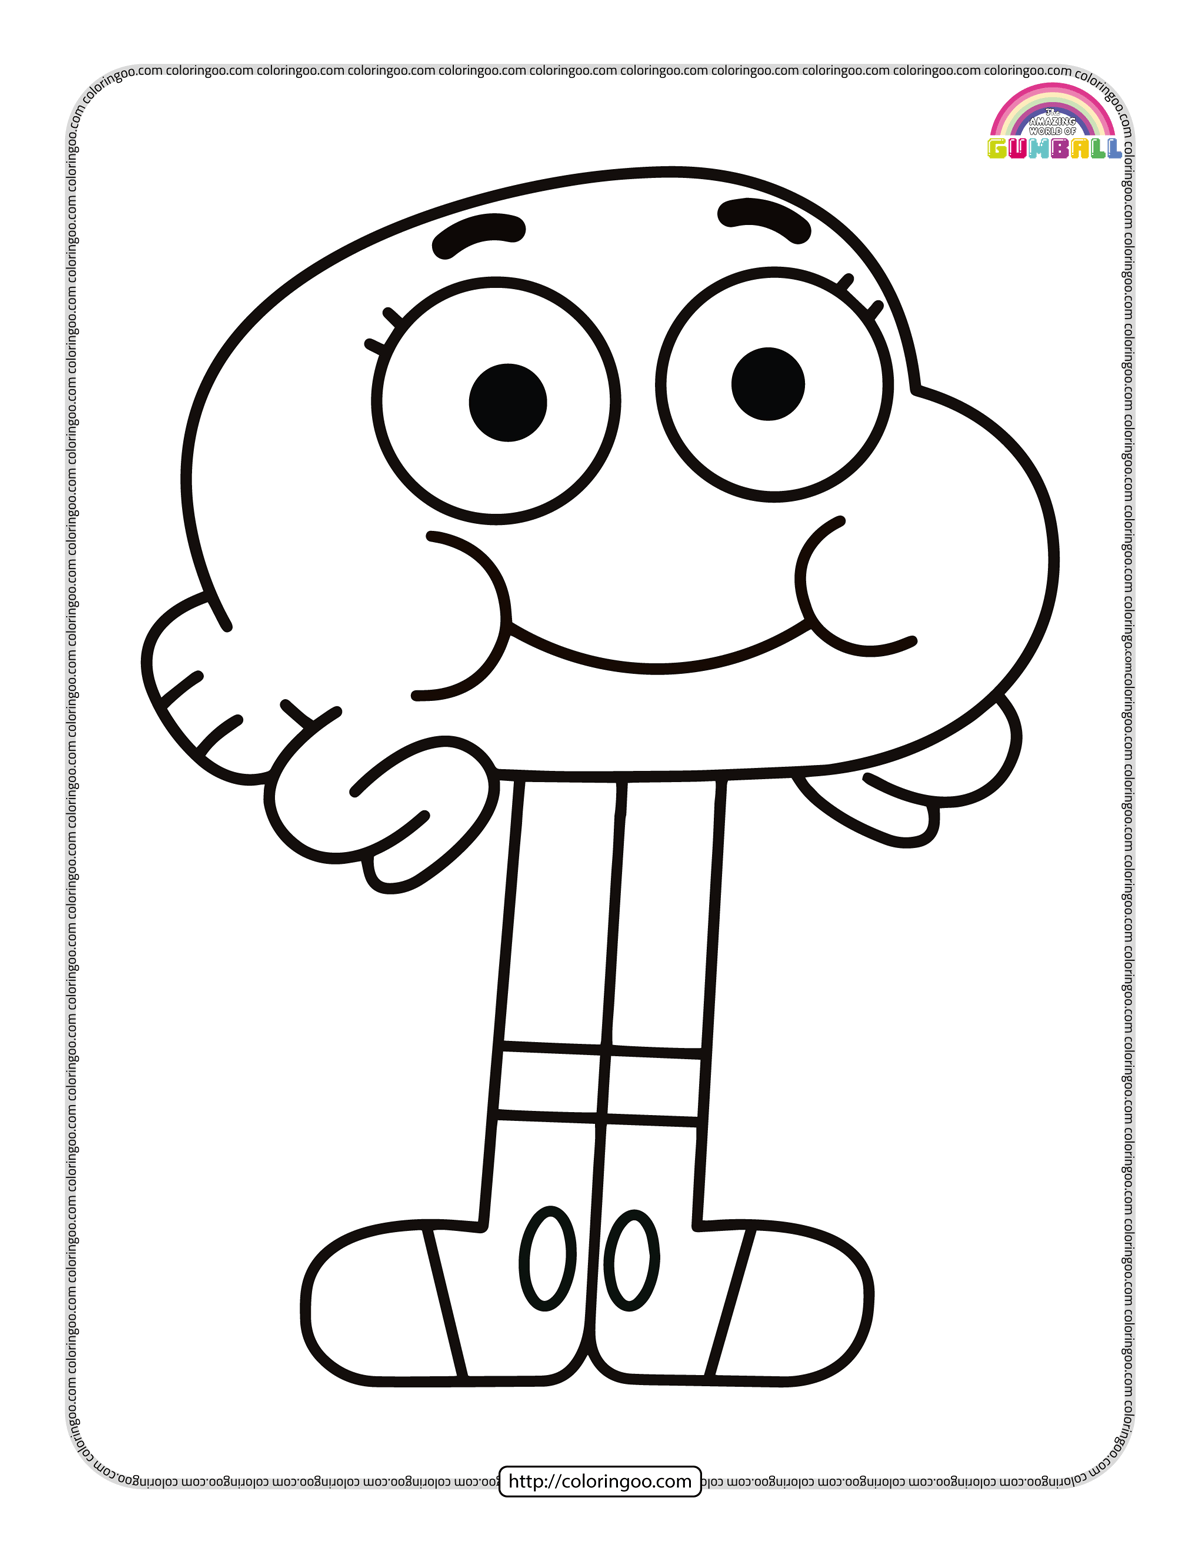 gumball darwin pdf coloring pages